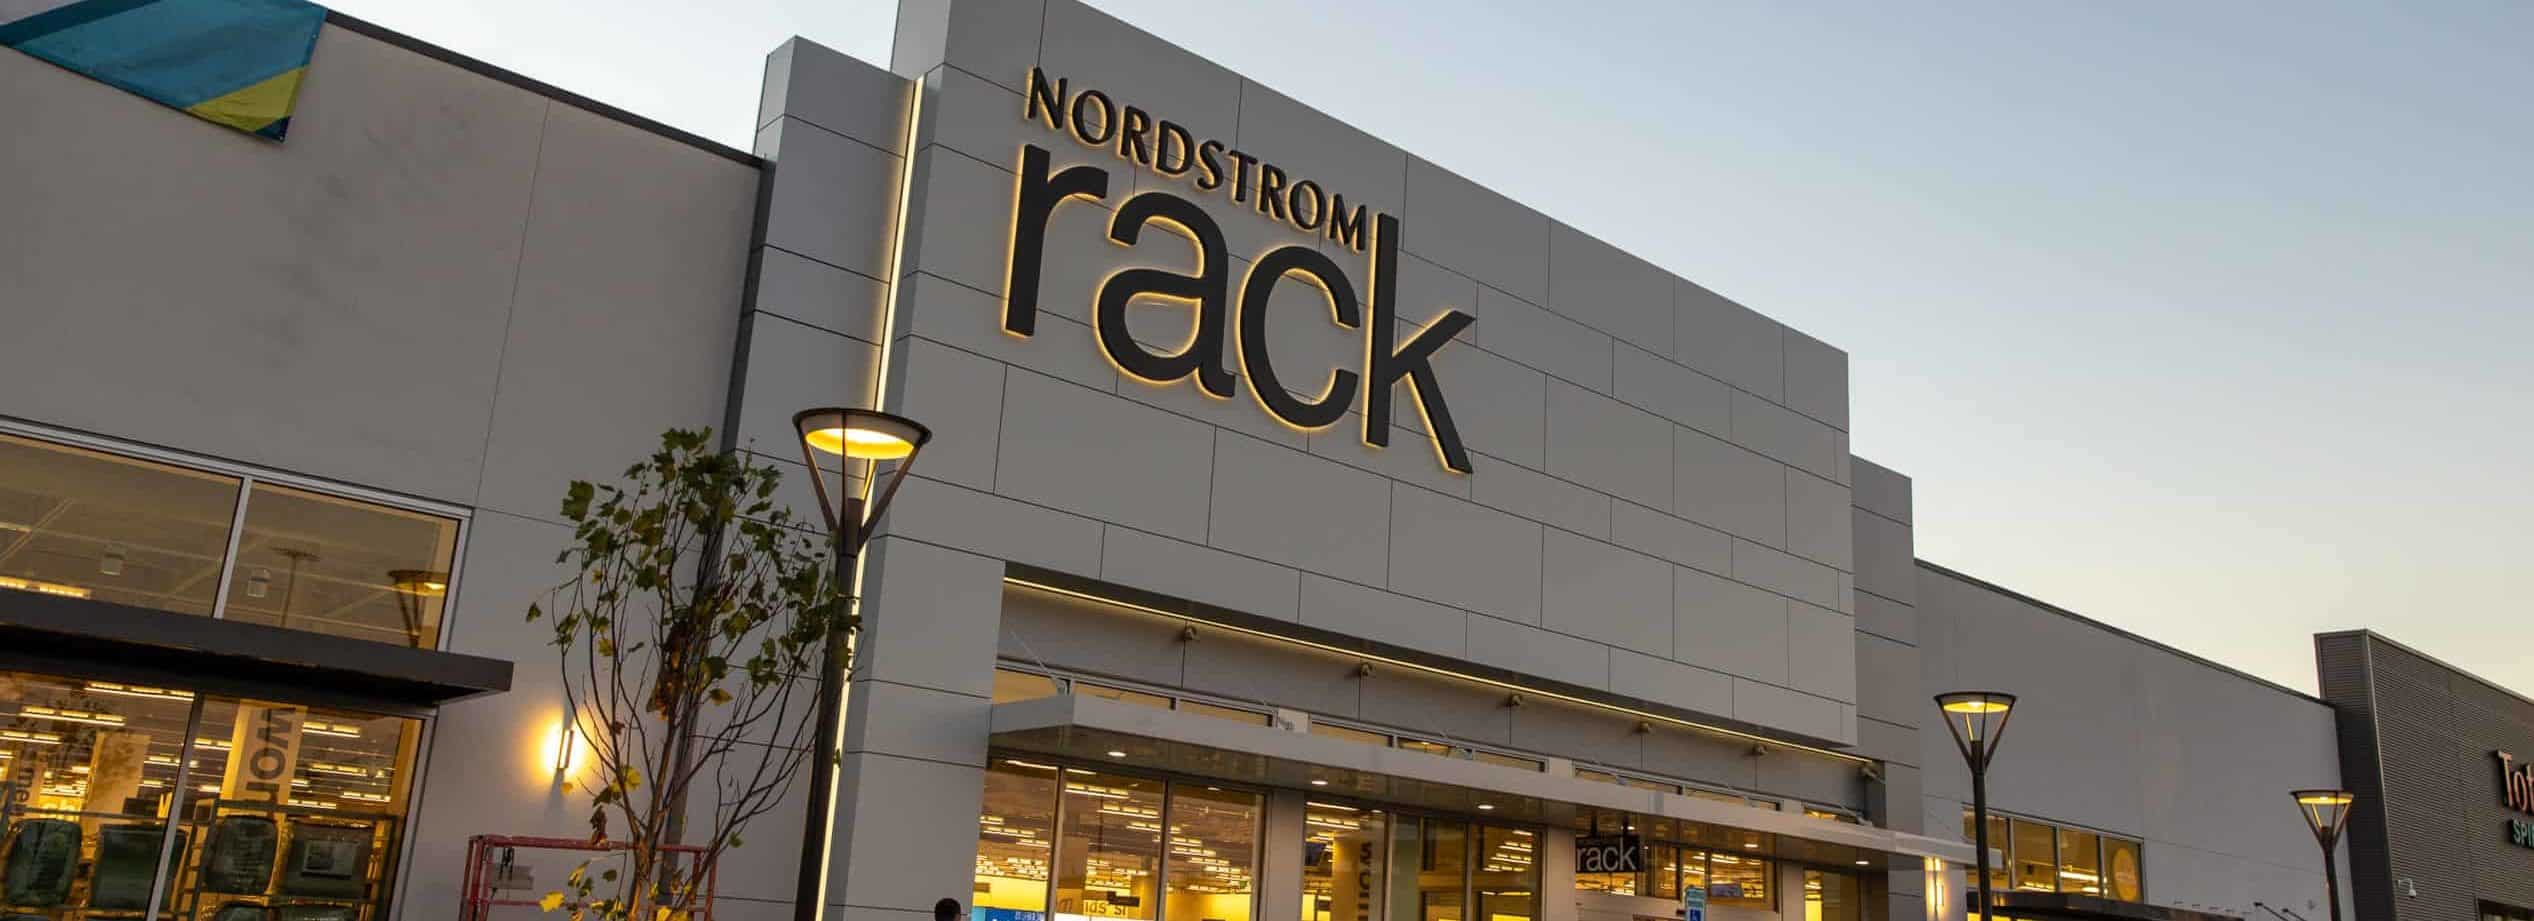 Nordstrom Rack store in a shopping center